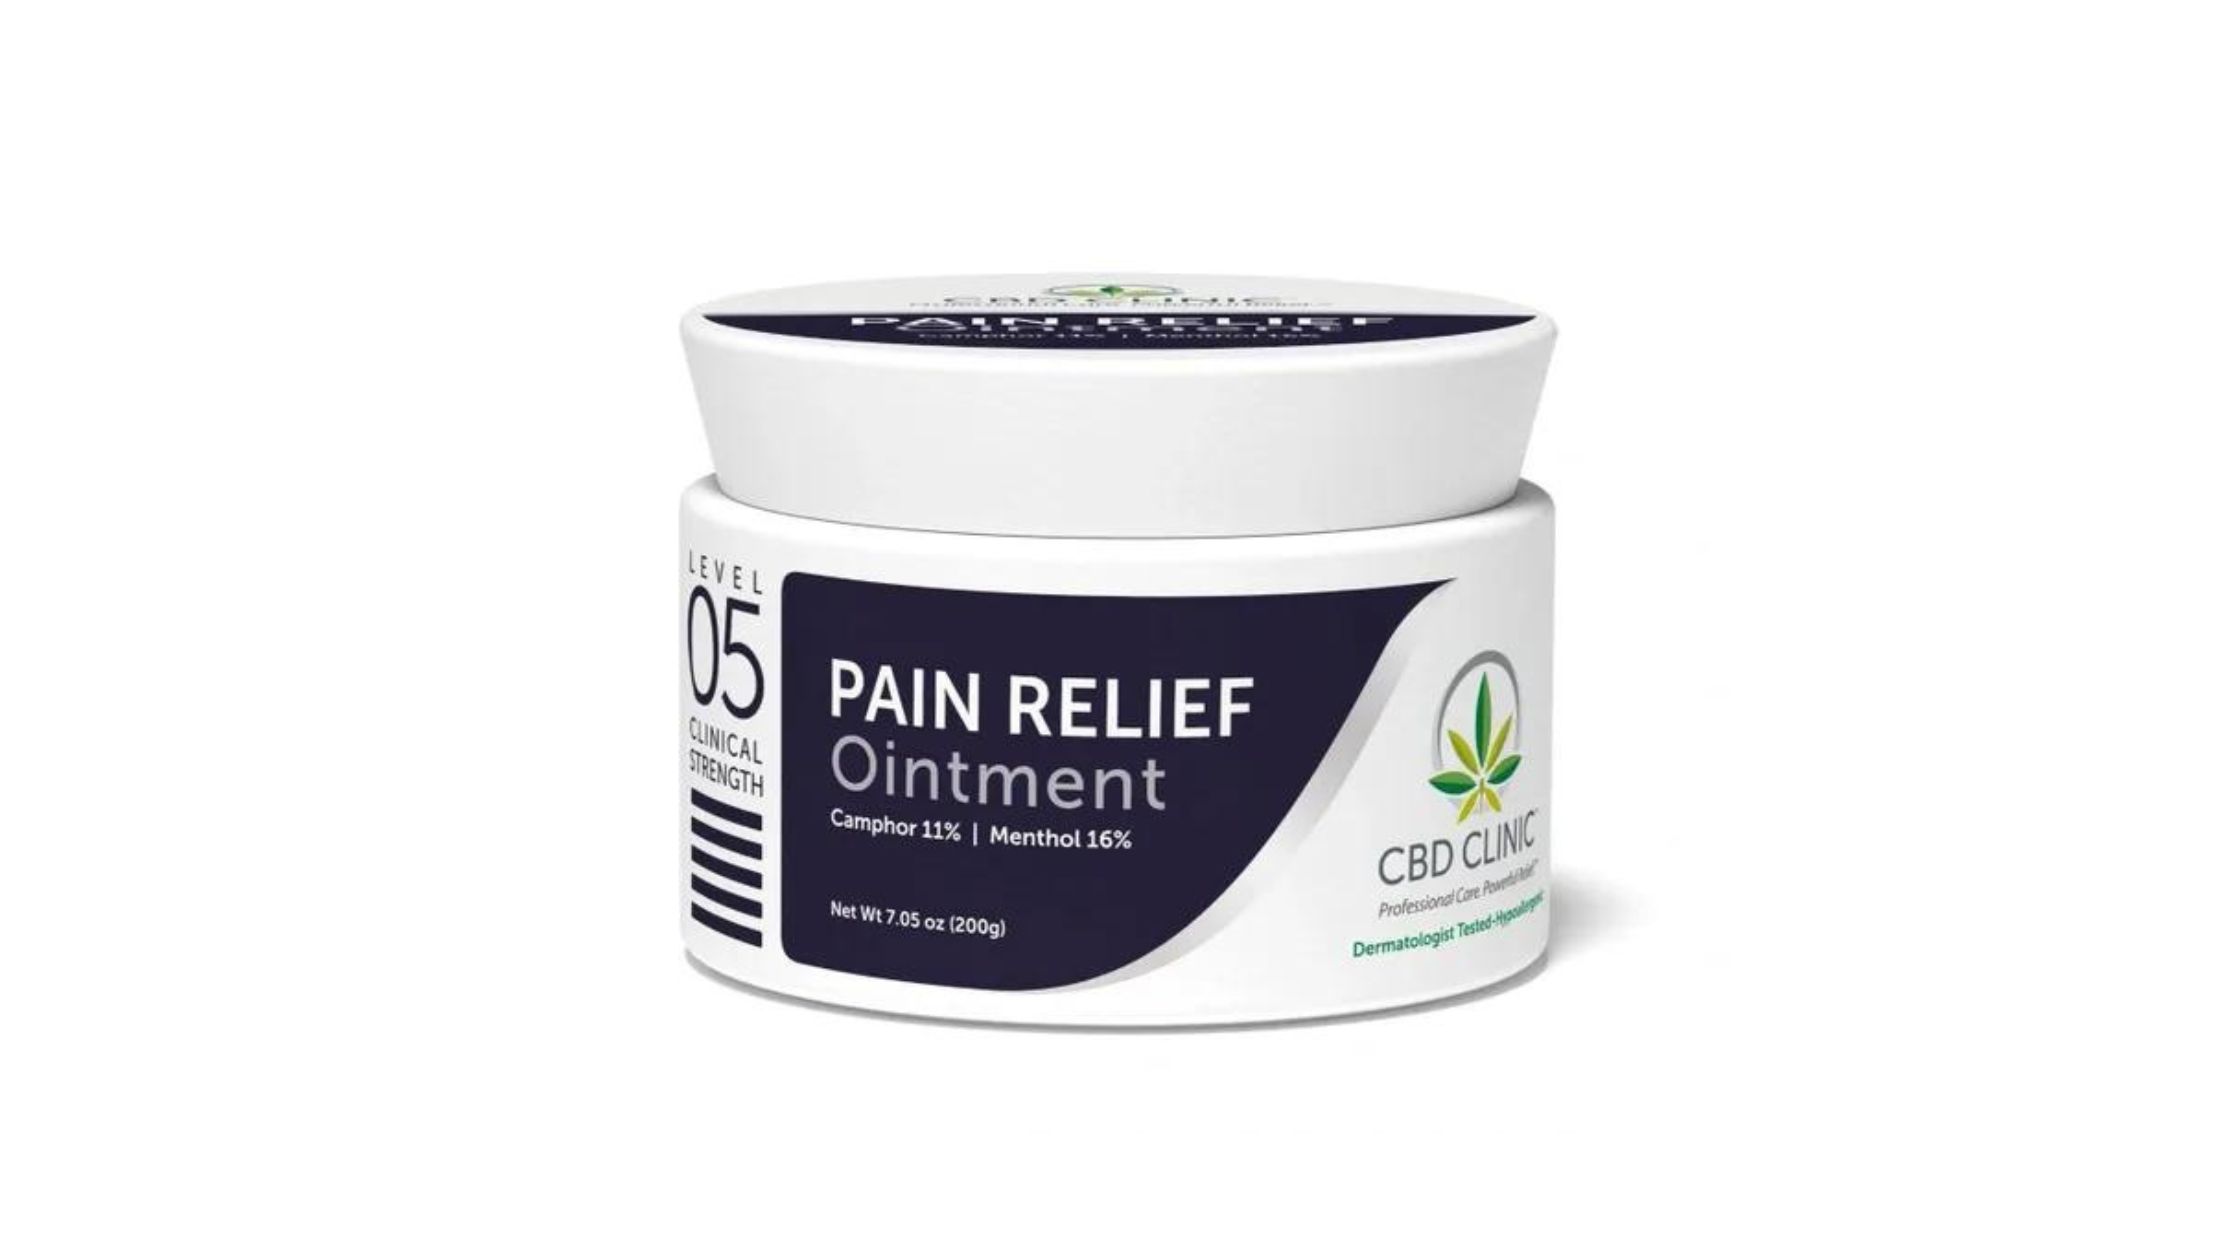 The Insider's Guide: How to Know You're Getting Genuine CBD Pain Relief Cream | TheAmberPost